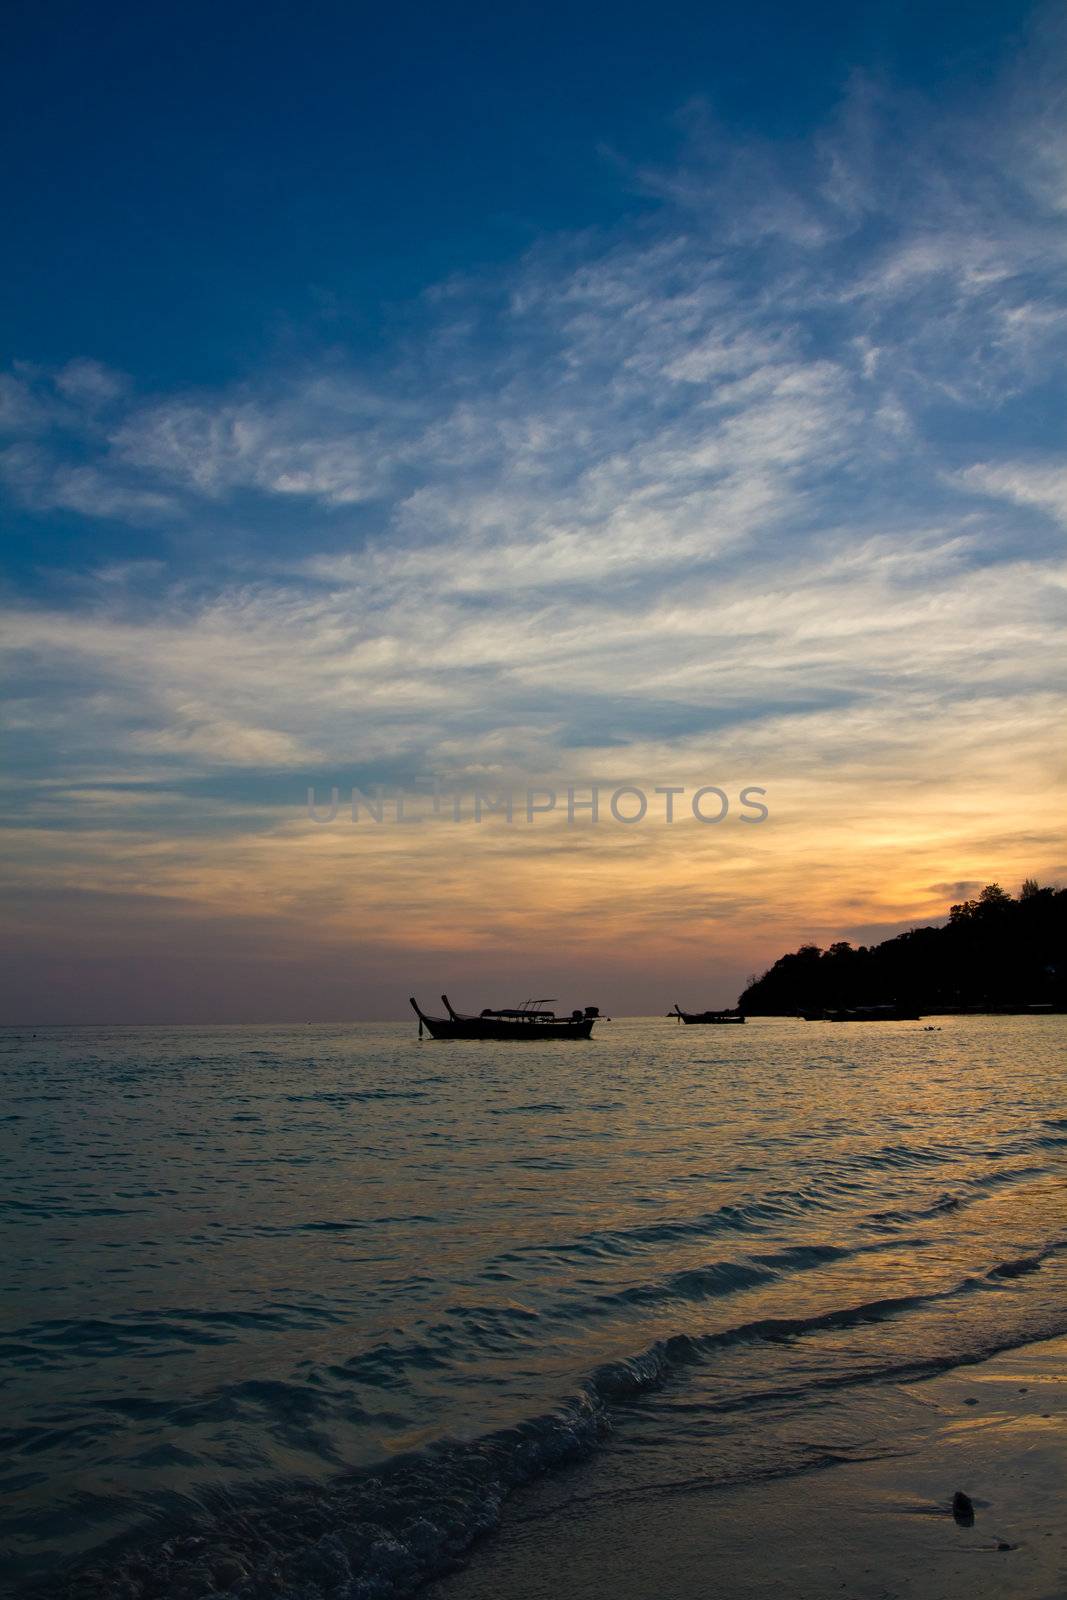 The sun goes down over longtail boats on a beach in Thailand.